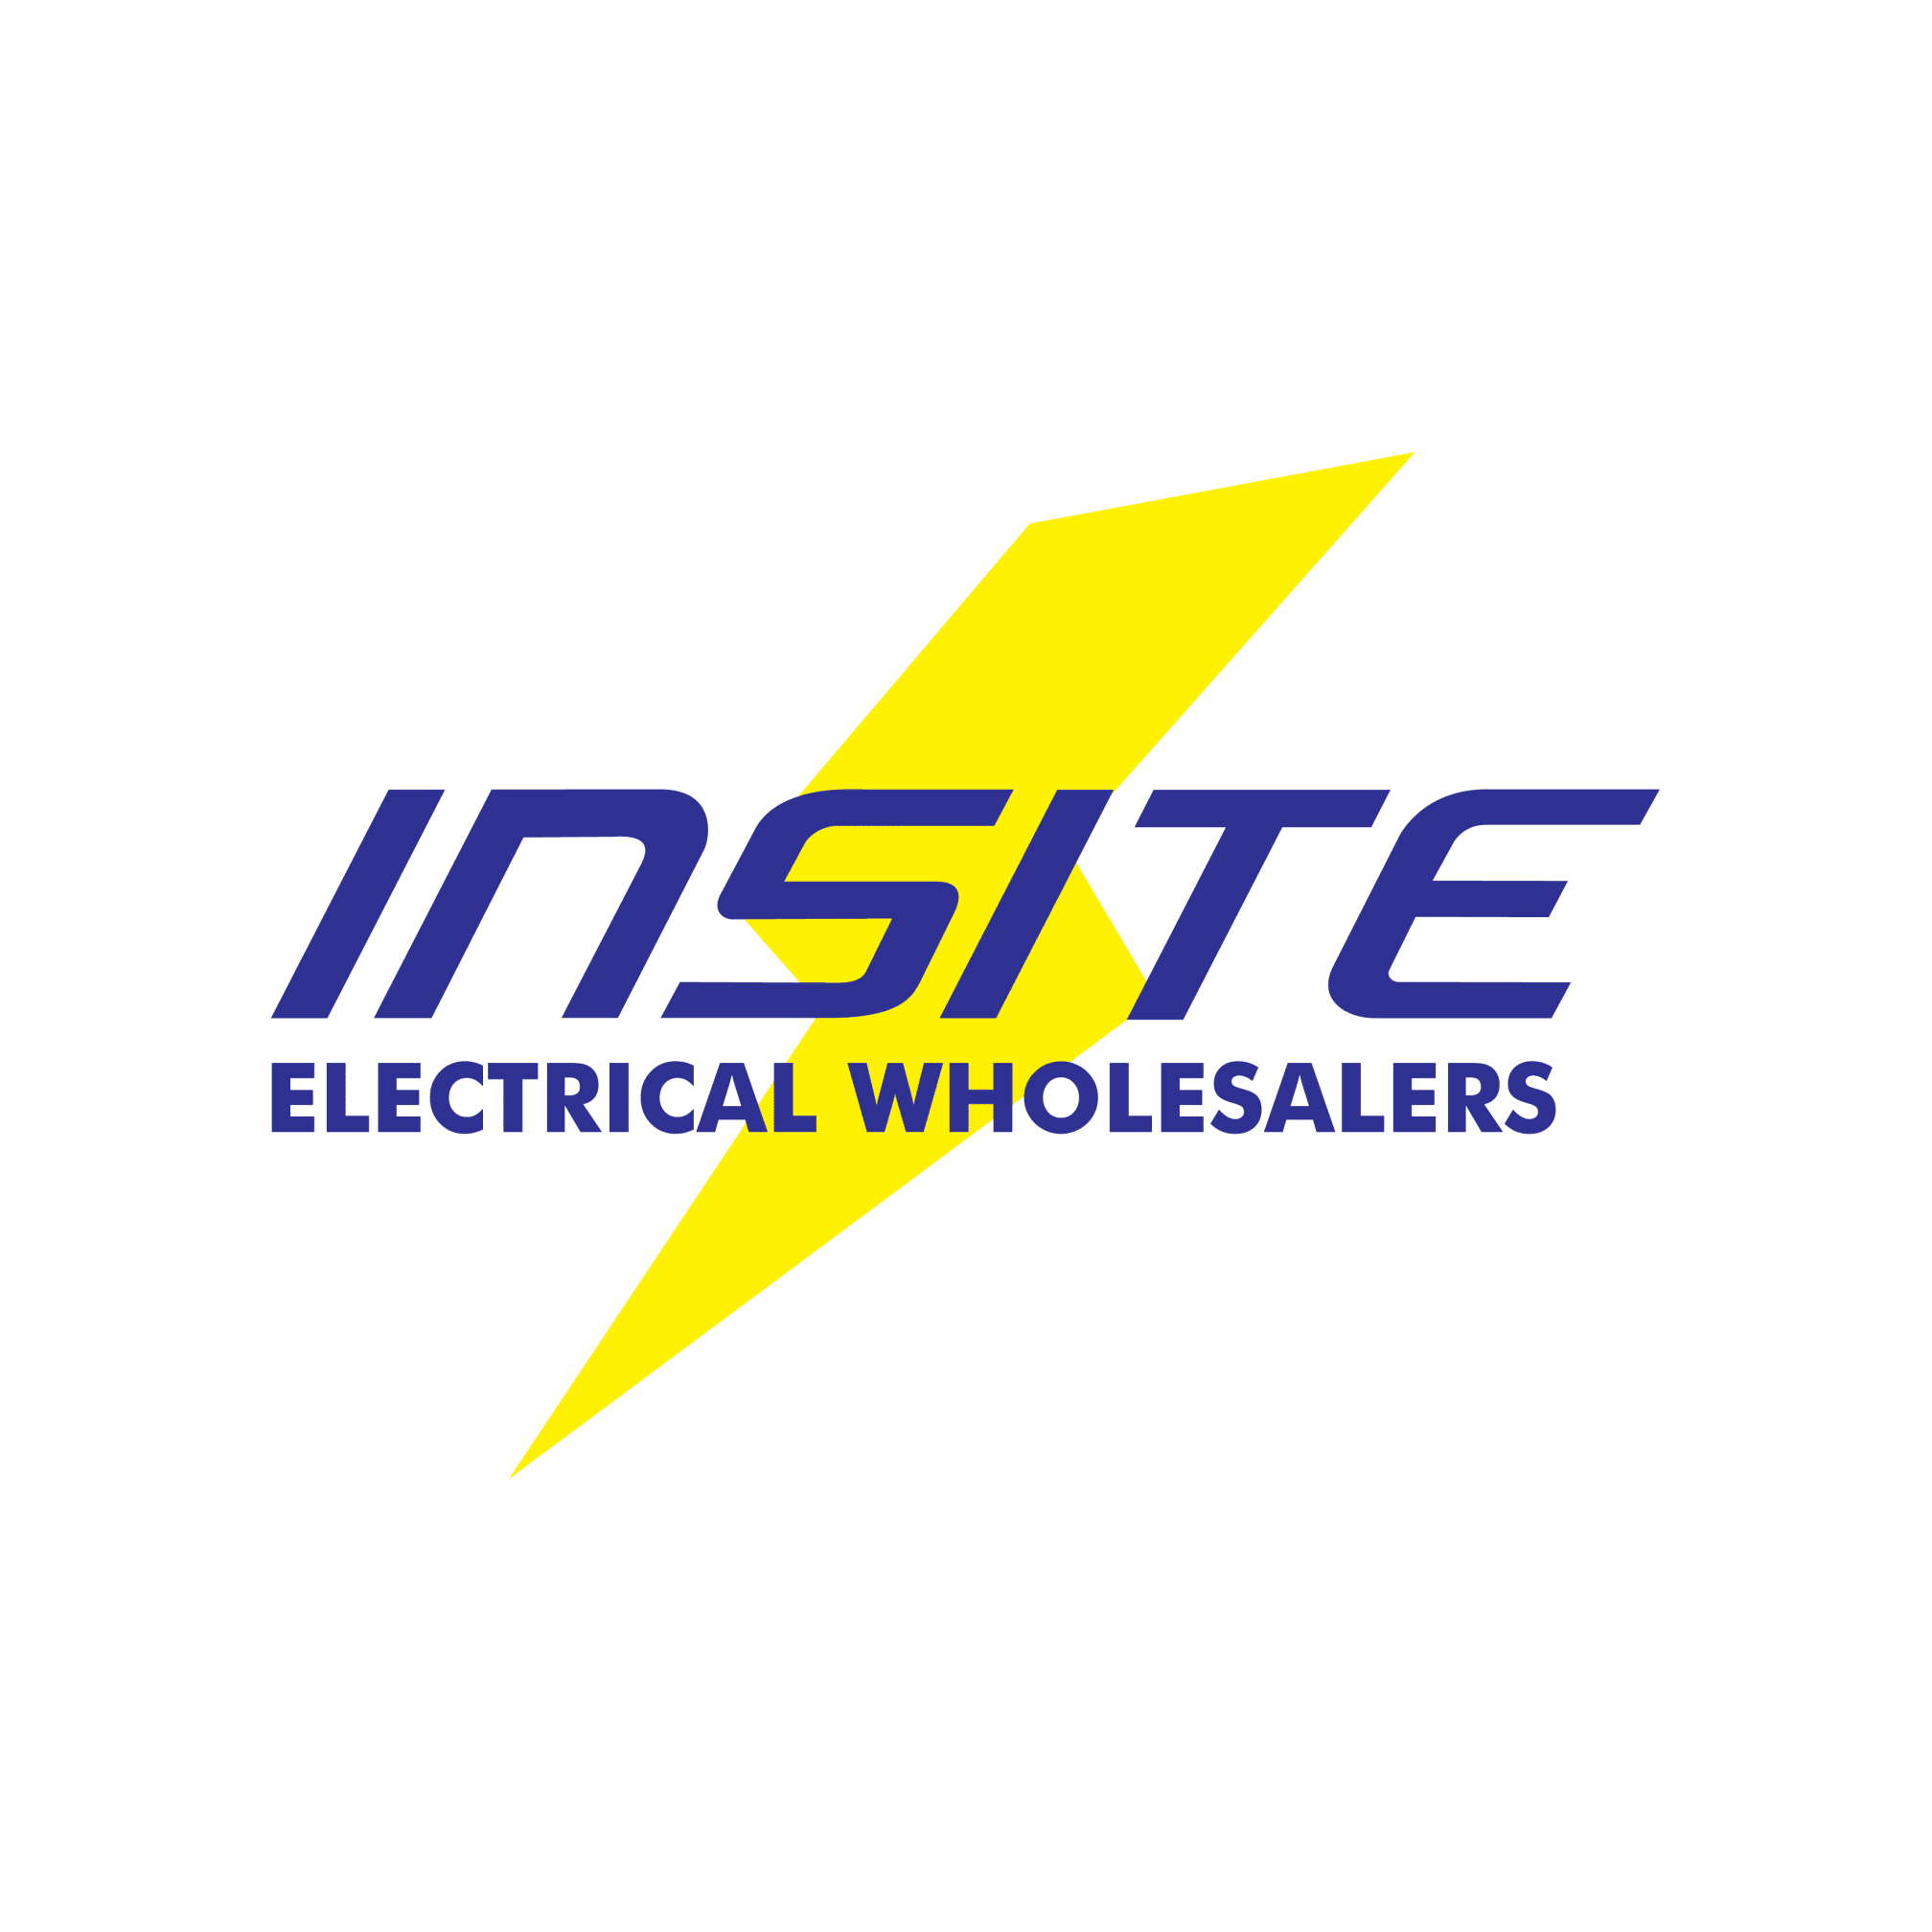 LOGO Insite Electrical Wholesalers Daventry 01327 312930